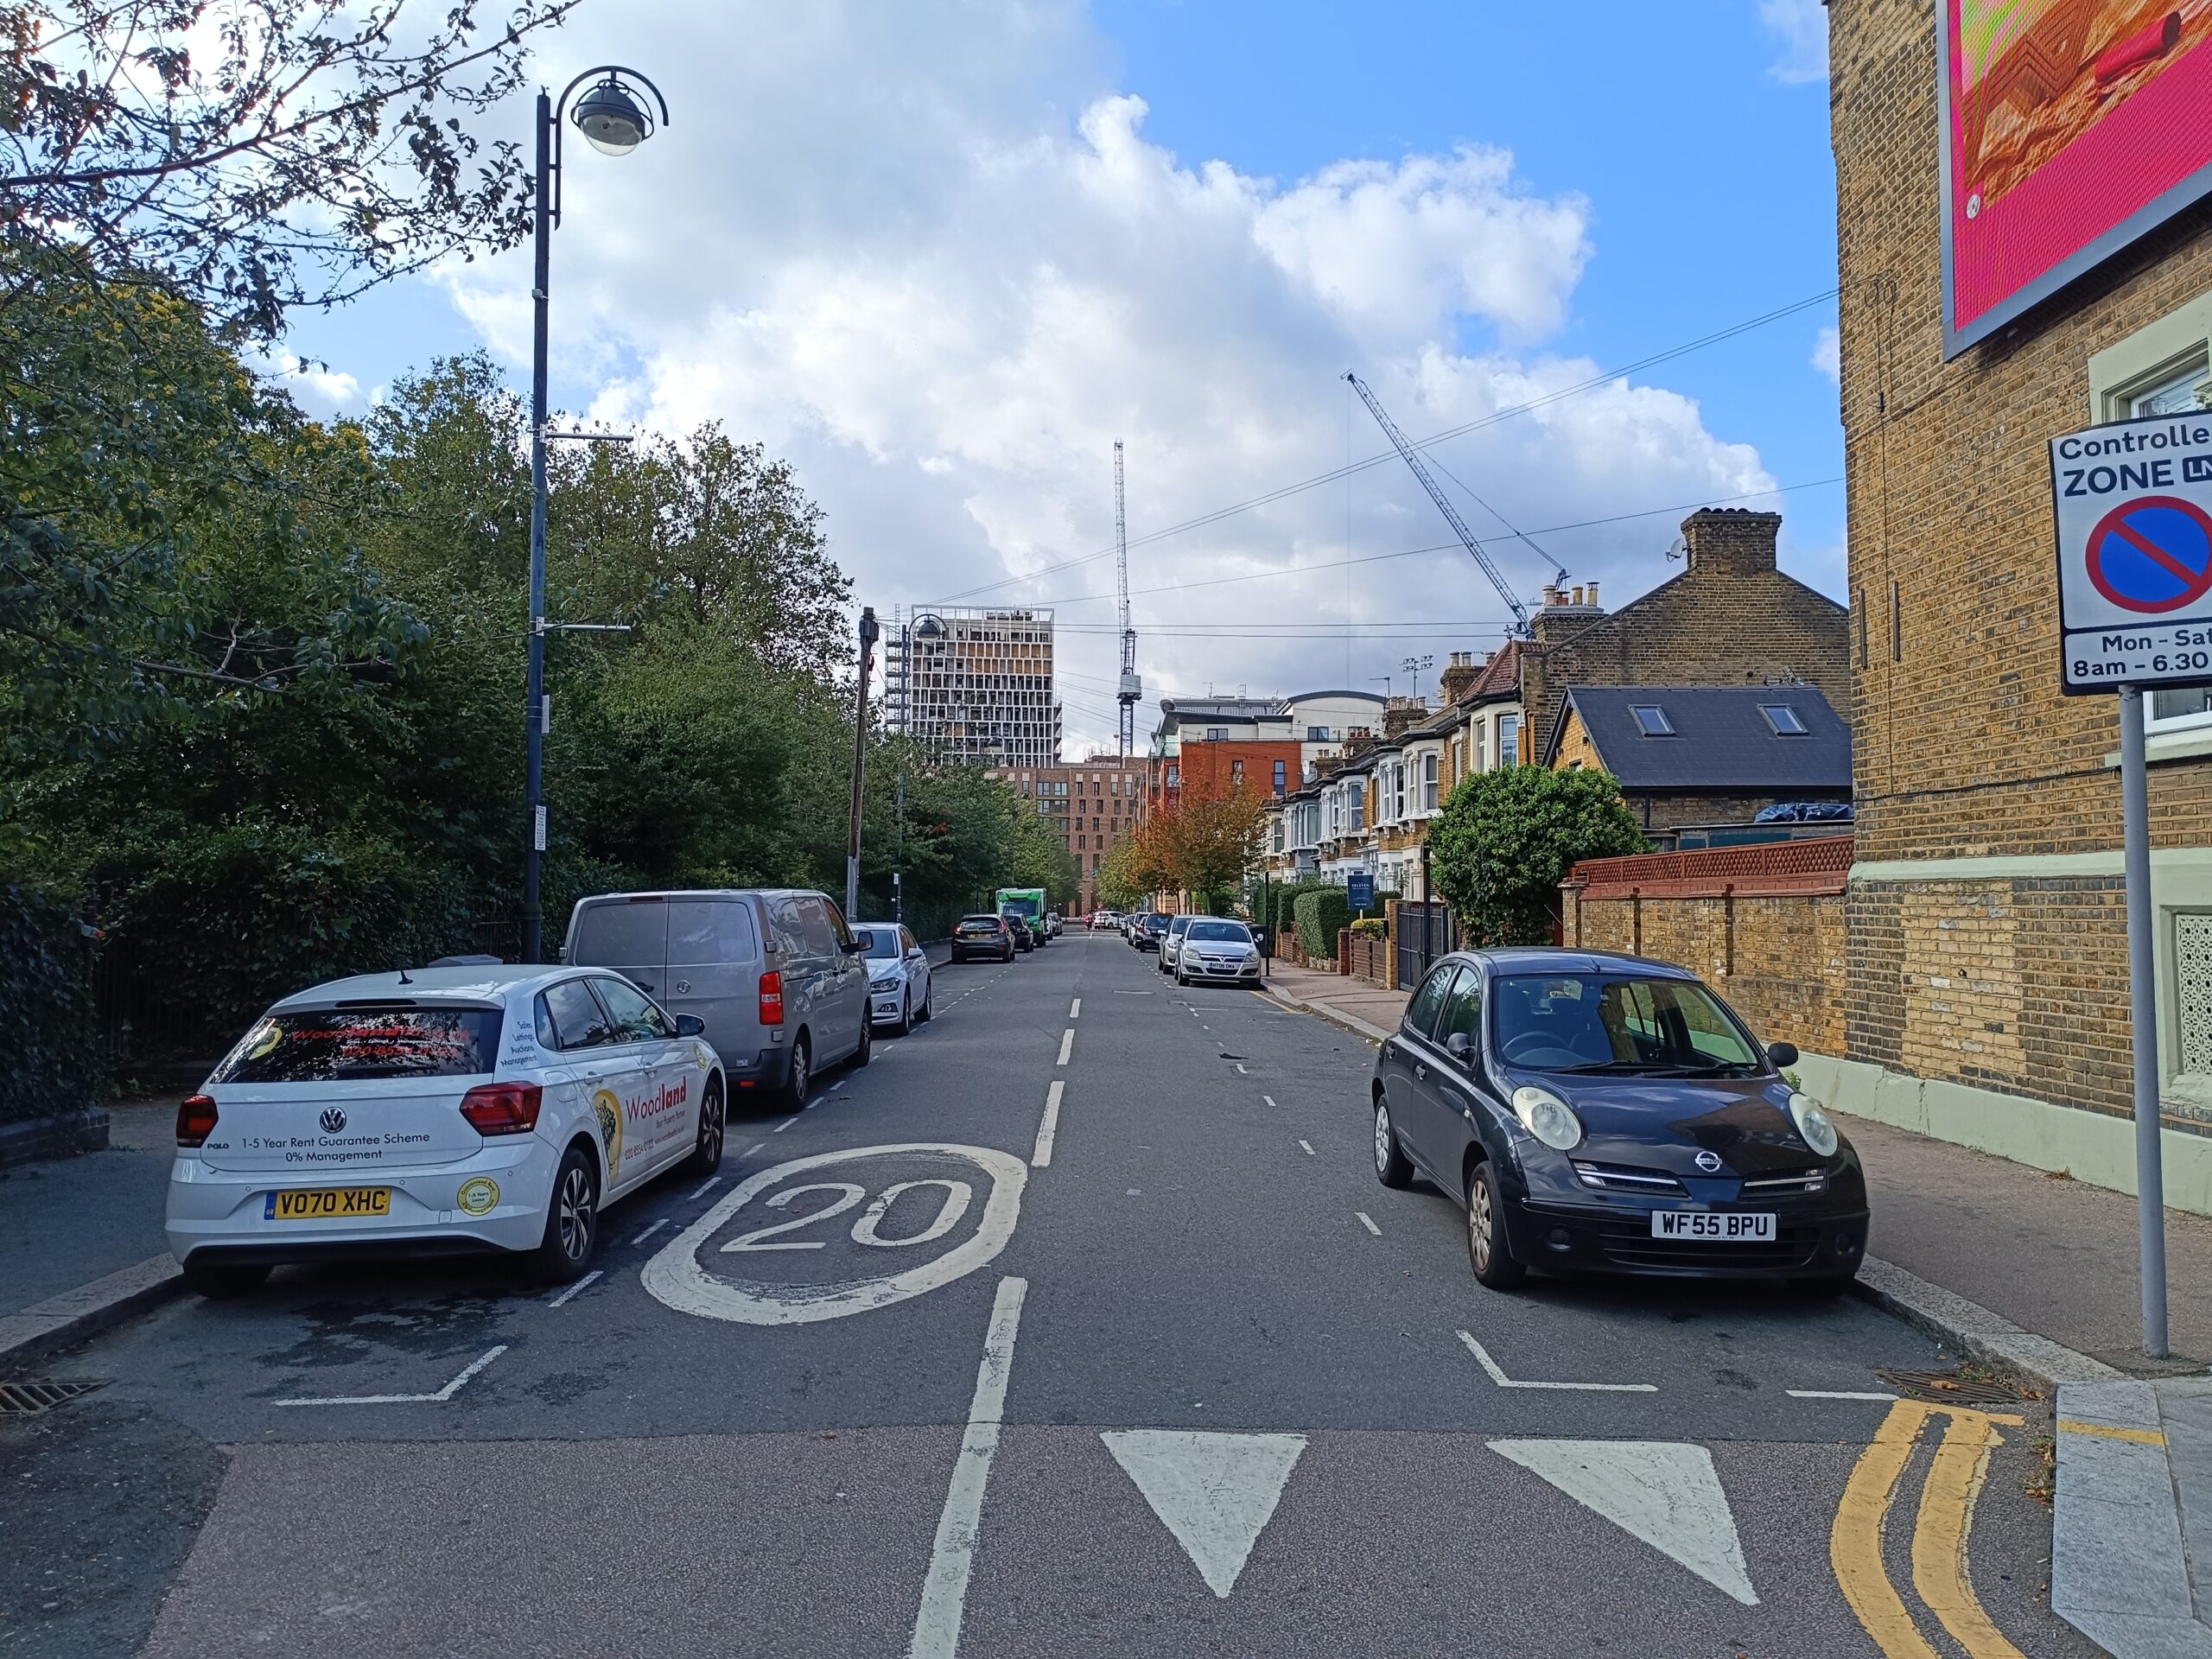 Leyton Area Guide - 20mph limits are a factor 